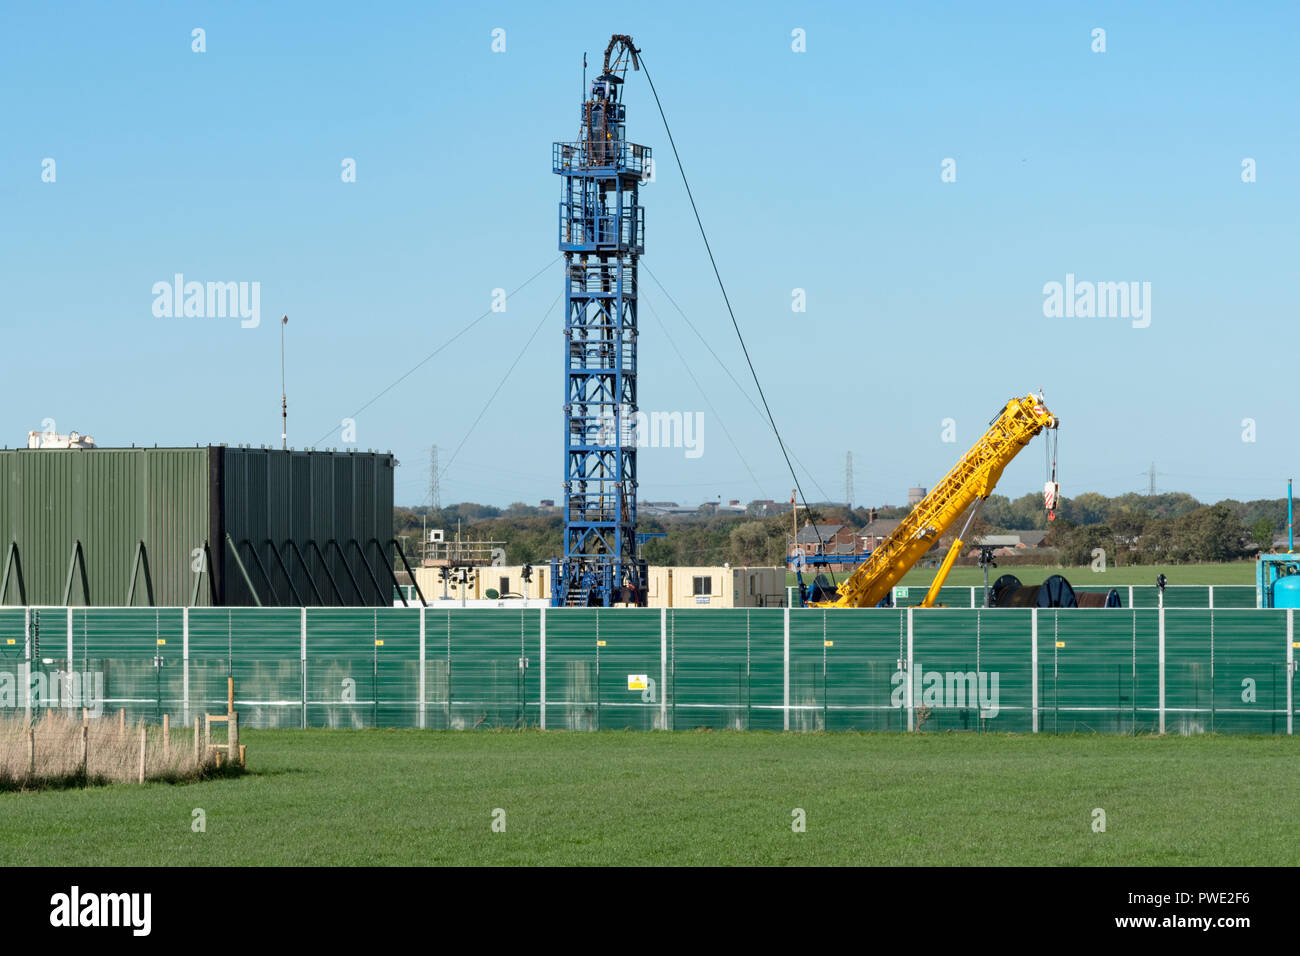 Blackpool. 16th. October 2018: Cuadrilla finally start fracking at their Preston New Road site after 7 years. Legal challenges and protests have contiually delayed Cuadrilla commencing their exploratory shale gas fracking tests  at the site. Protests were carried out today as the anti-fracking protesters vow to continue to campaign to get fracking stopped in Britain. Several protesters locked on devices causing Preston New Road to be closed to traffic for part of the day. Credit: Dave Ellison/Alamy Live News Stock Photo